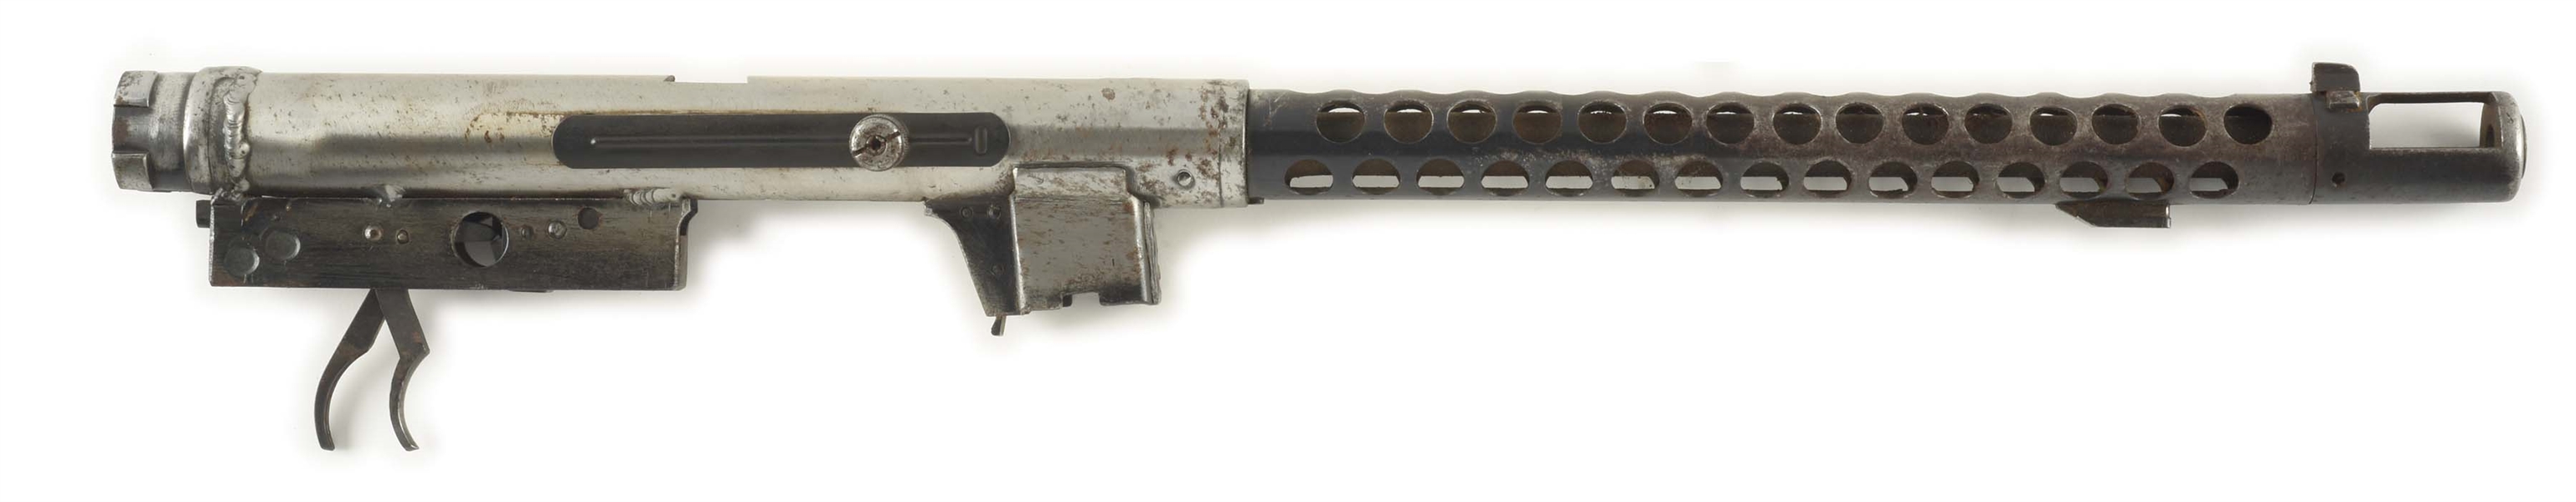 (N) REGISTERED STEN RECEIVER TUBE WITH ADAPTED BERETTA 38A MACHINE GUN PARTS (FULLY TRANSFERABLE).